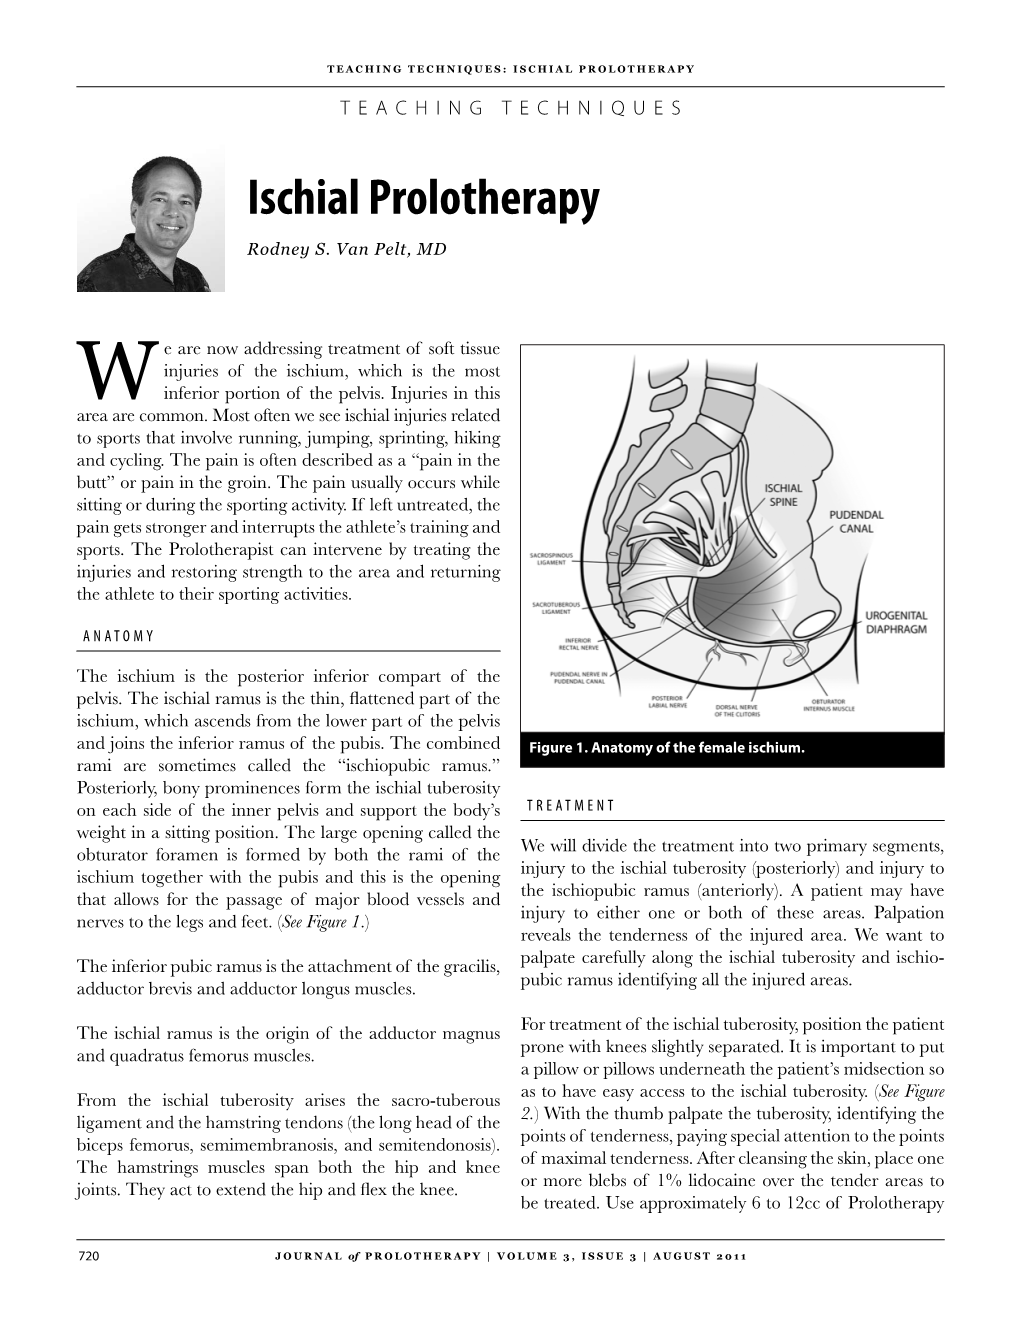 Ischial Prolotherapy